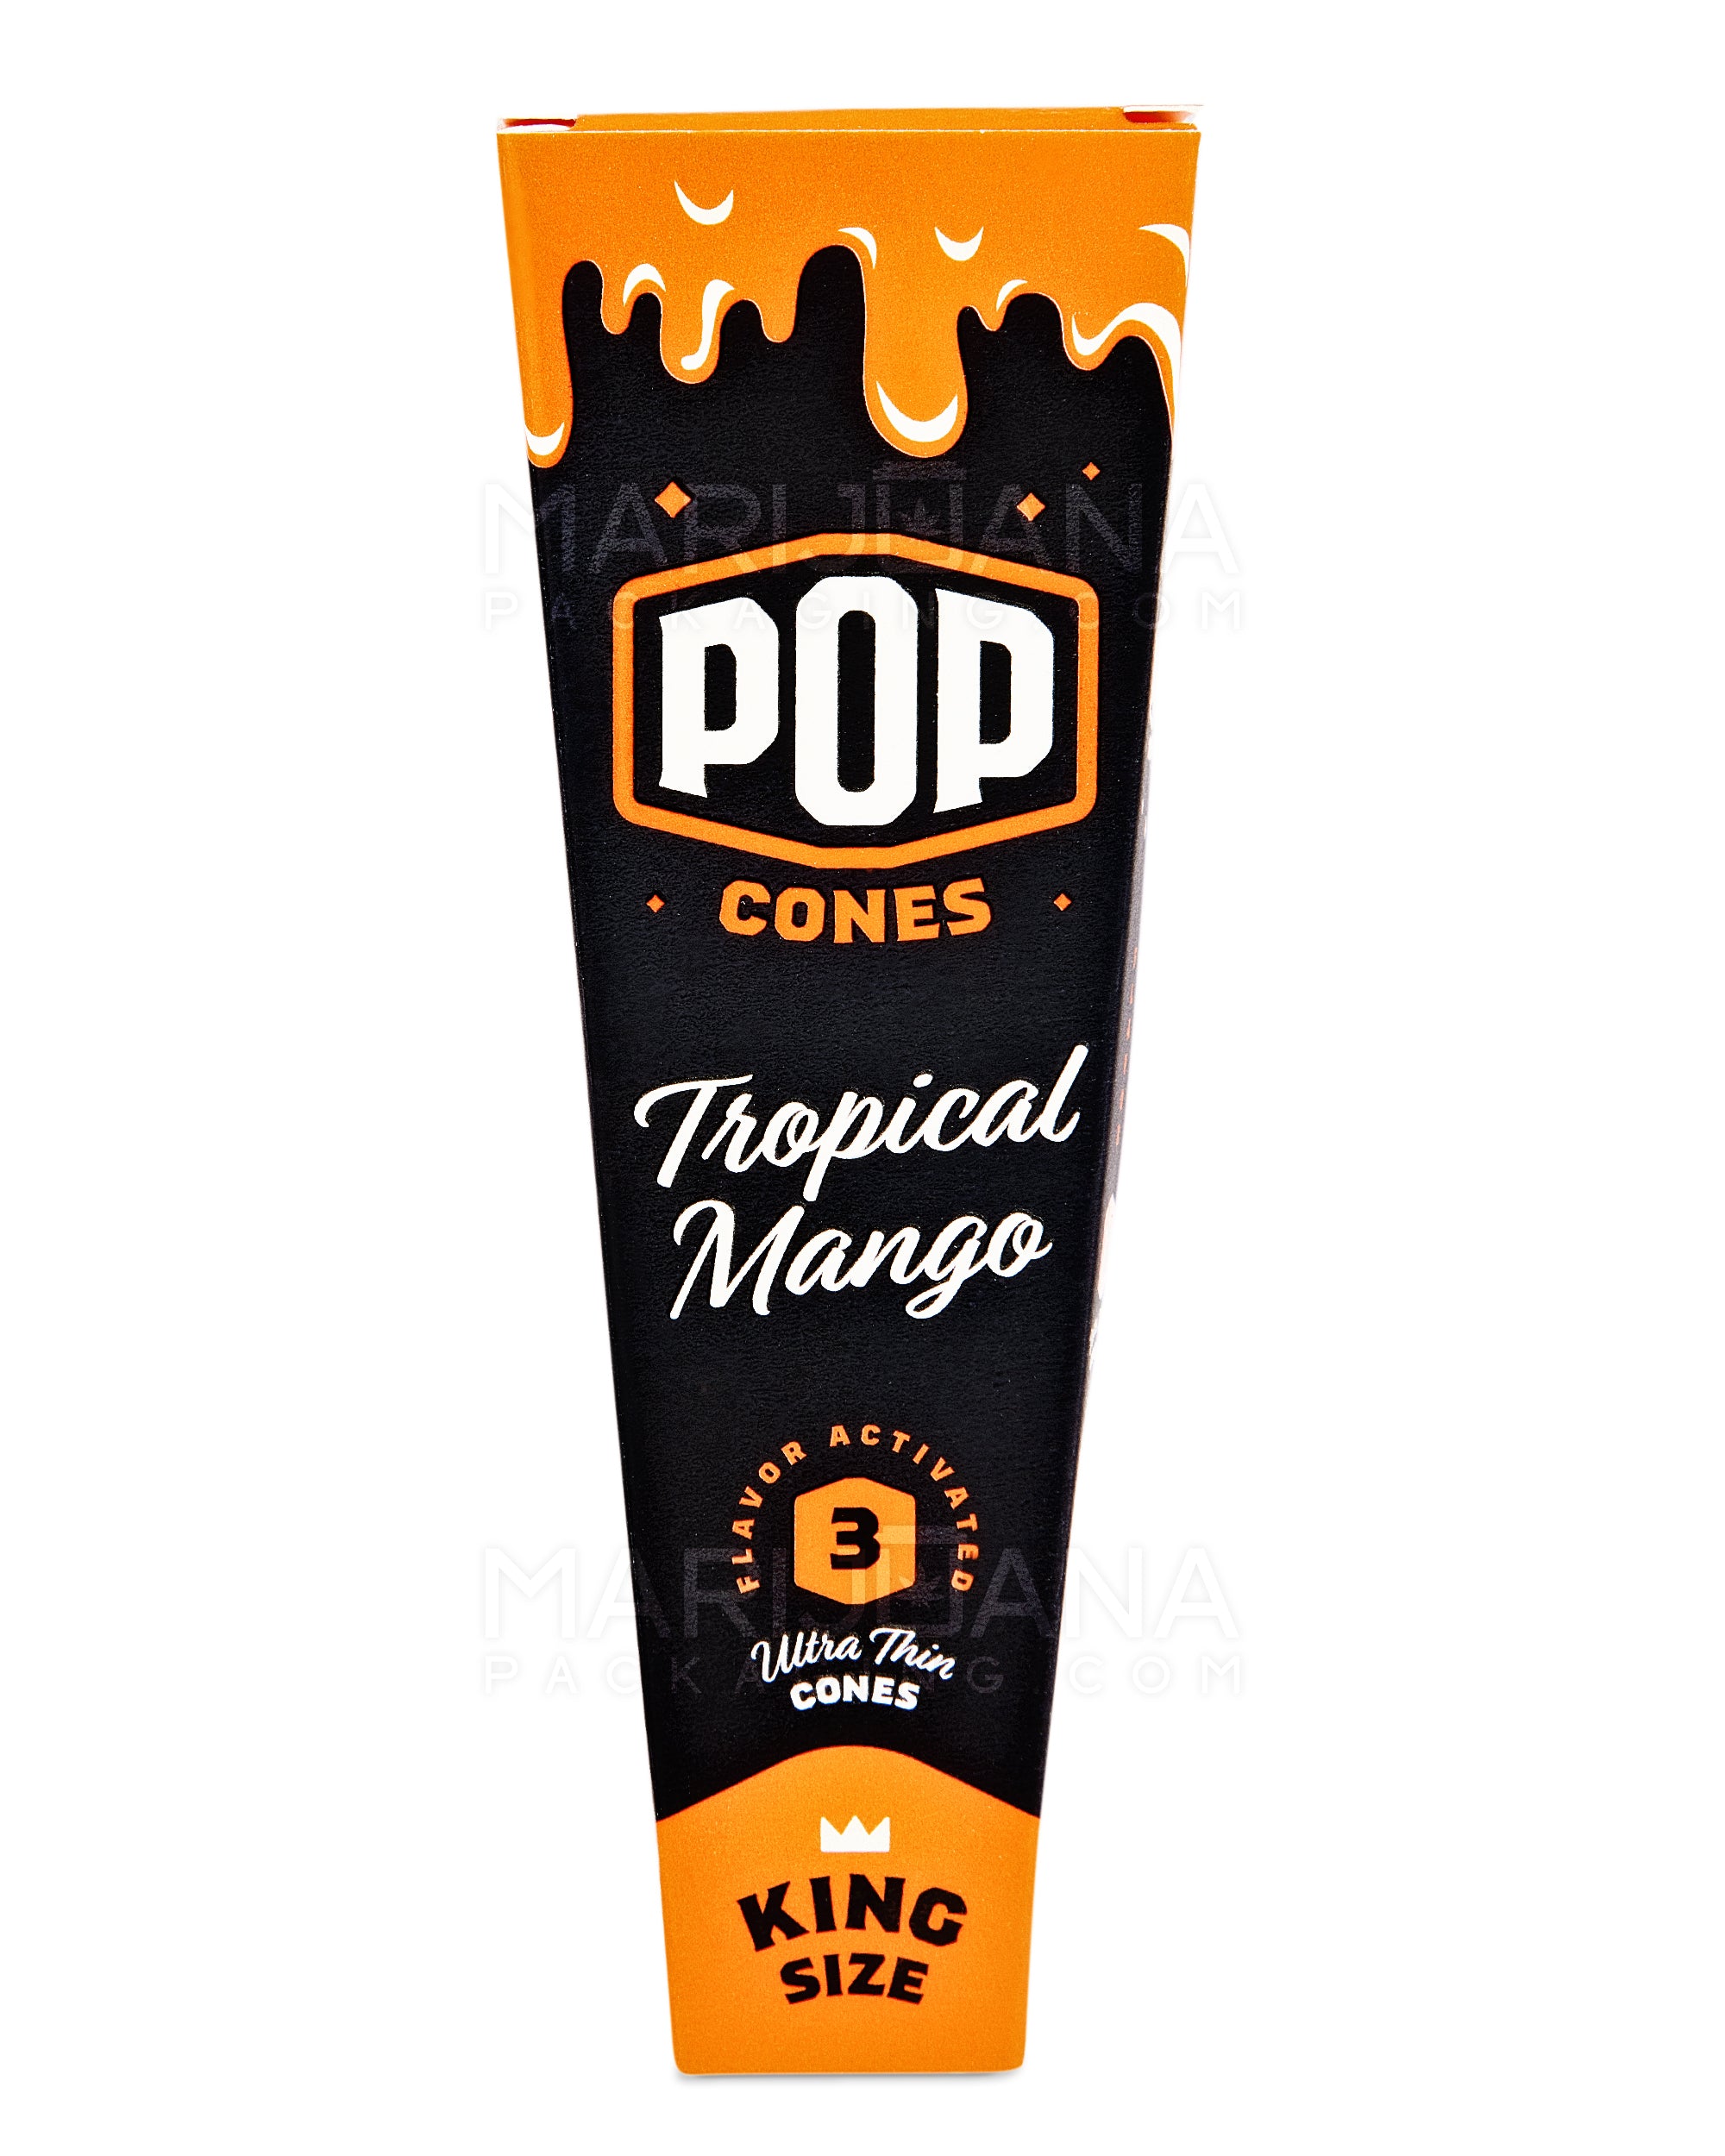 POP CONES | 'Retail Display' King Size Pre-Rolled Cones | 109mm - Tropical Mango - 24 Count - 2